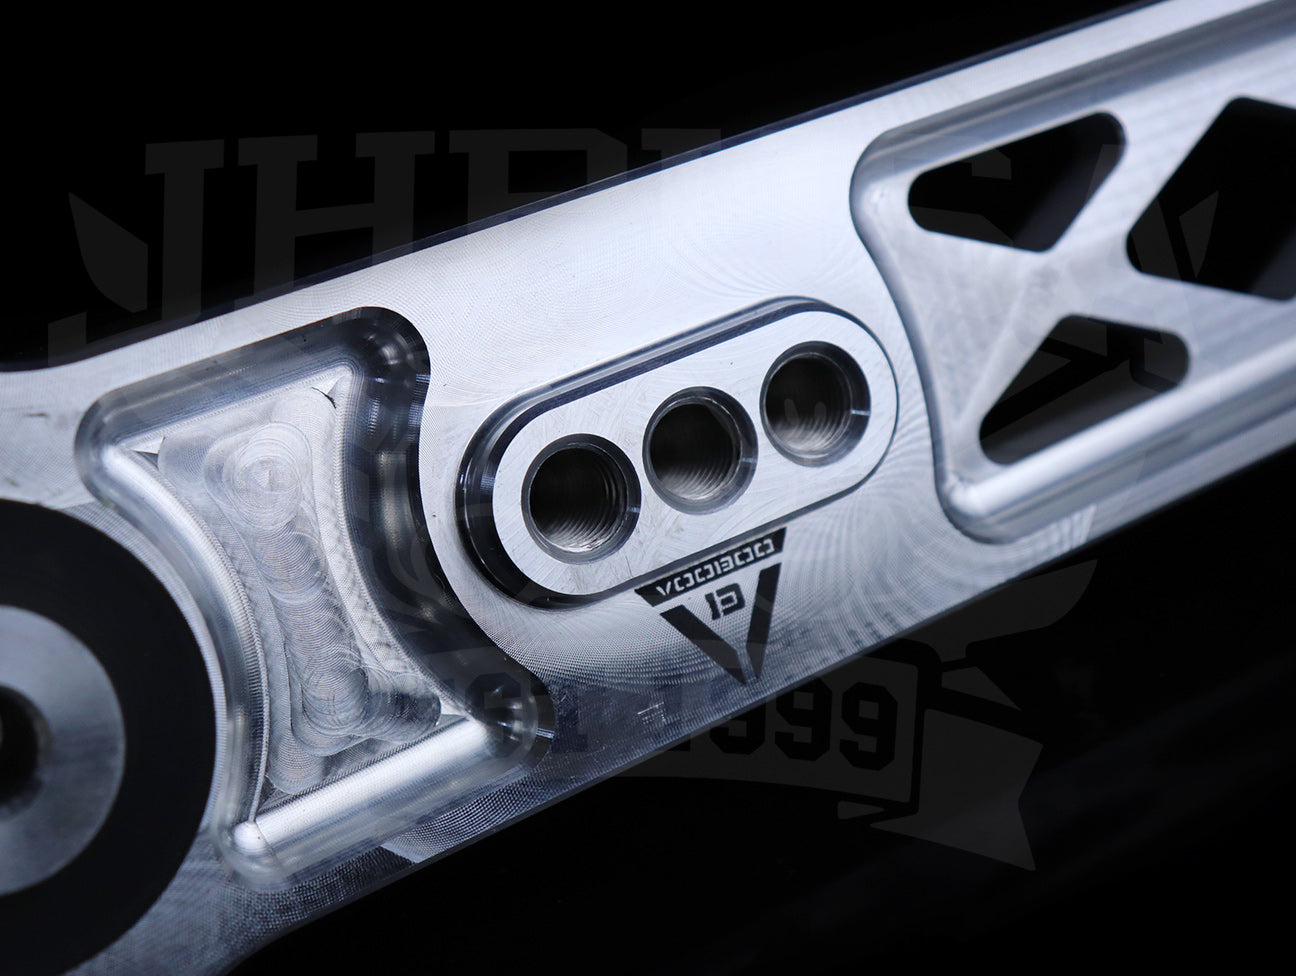 Voodoo 13 Billet Rear Lower Control Arms - 96-00 Civic